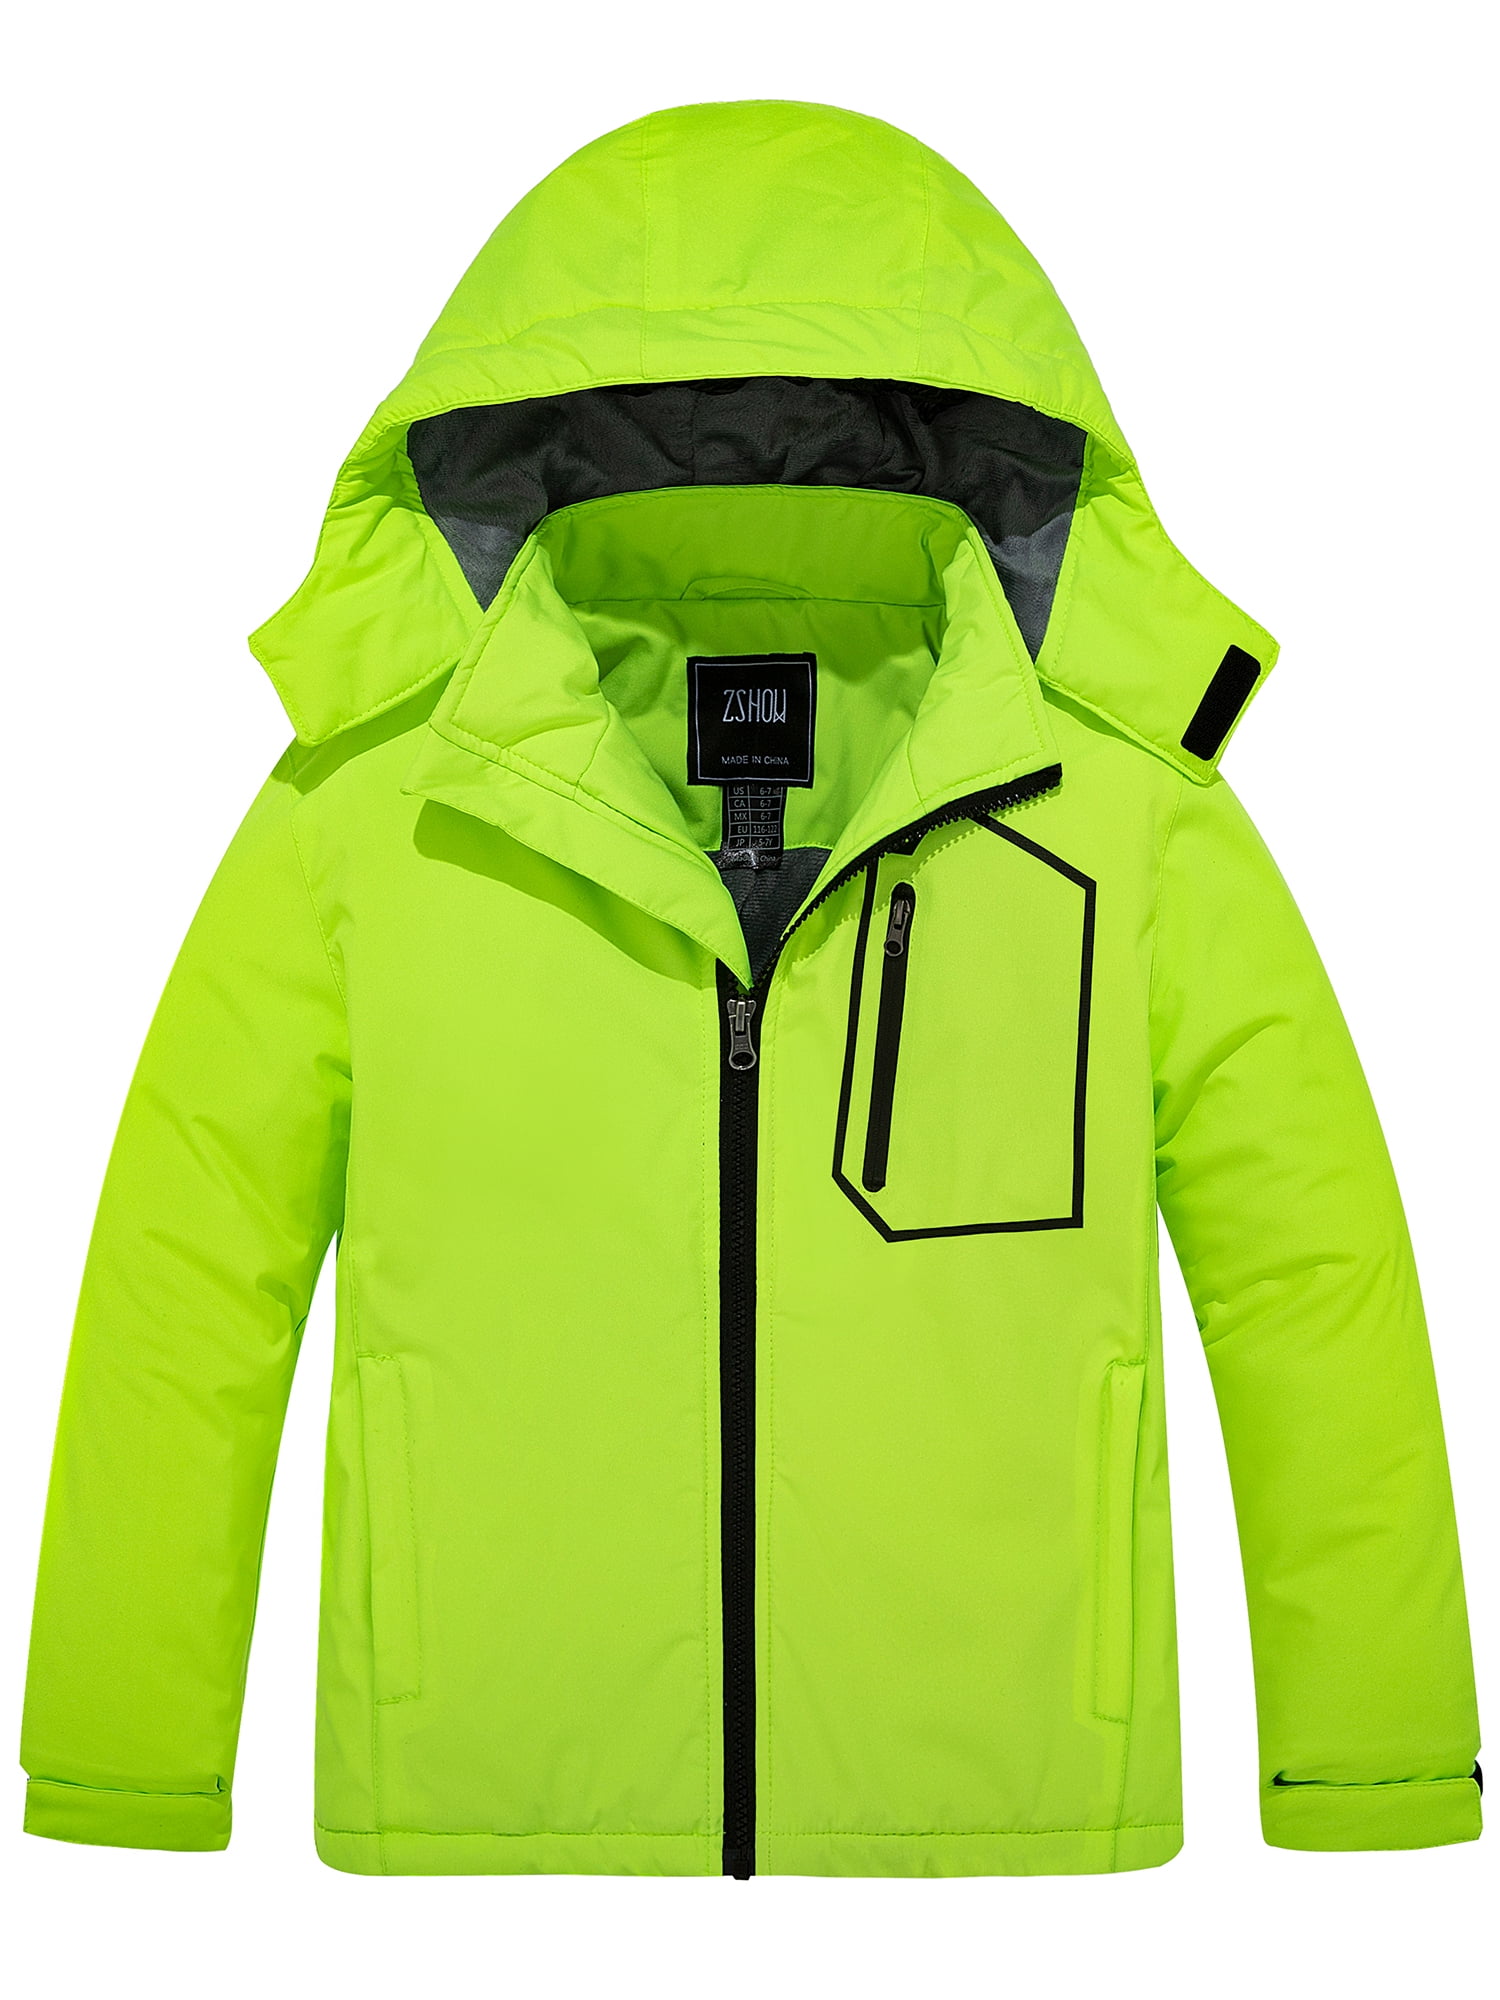 ZSHOW Boy's Windproof Ski Jacket Thick Winter Snow Coat with Hood ...